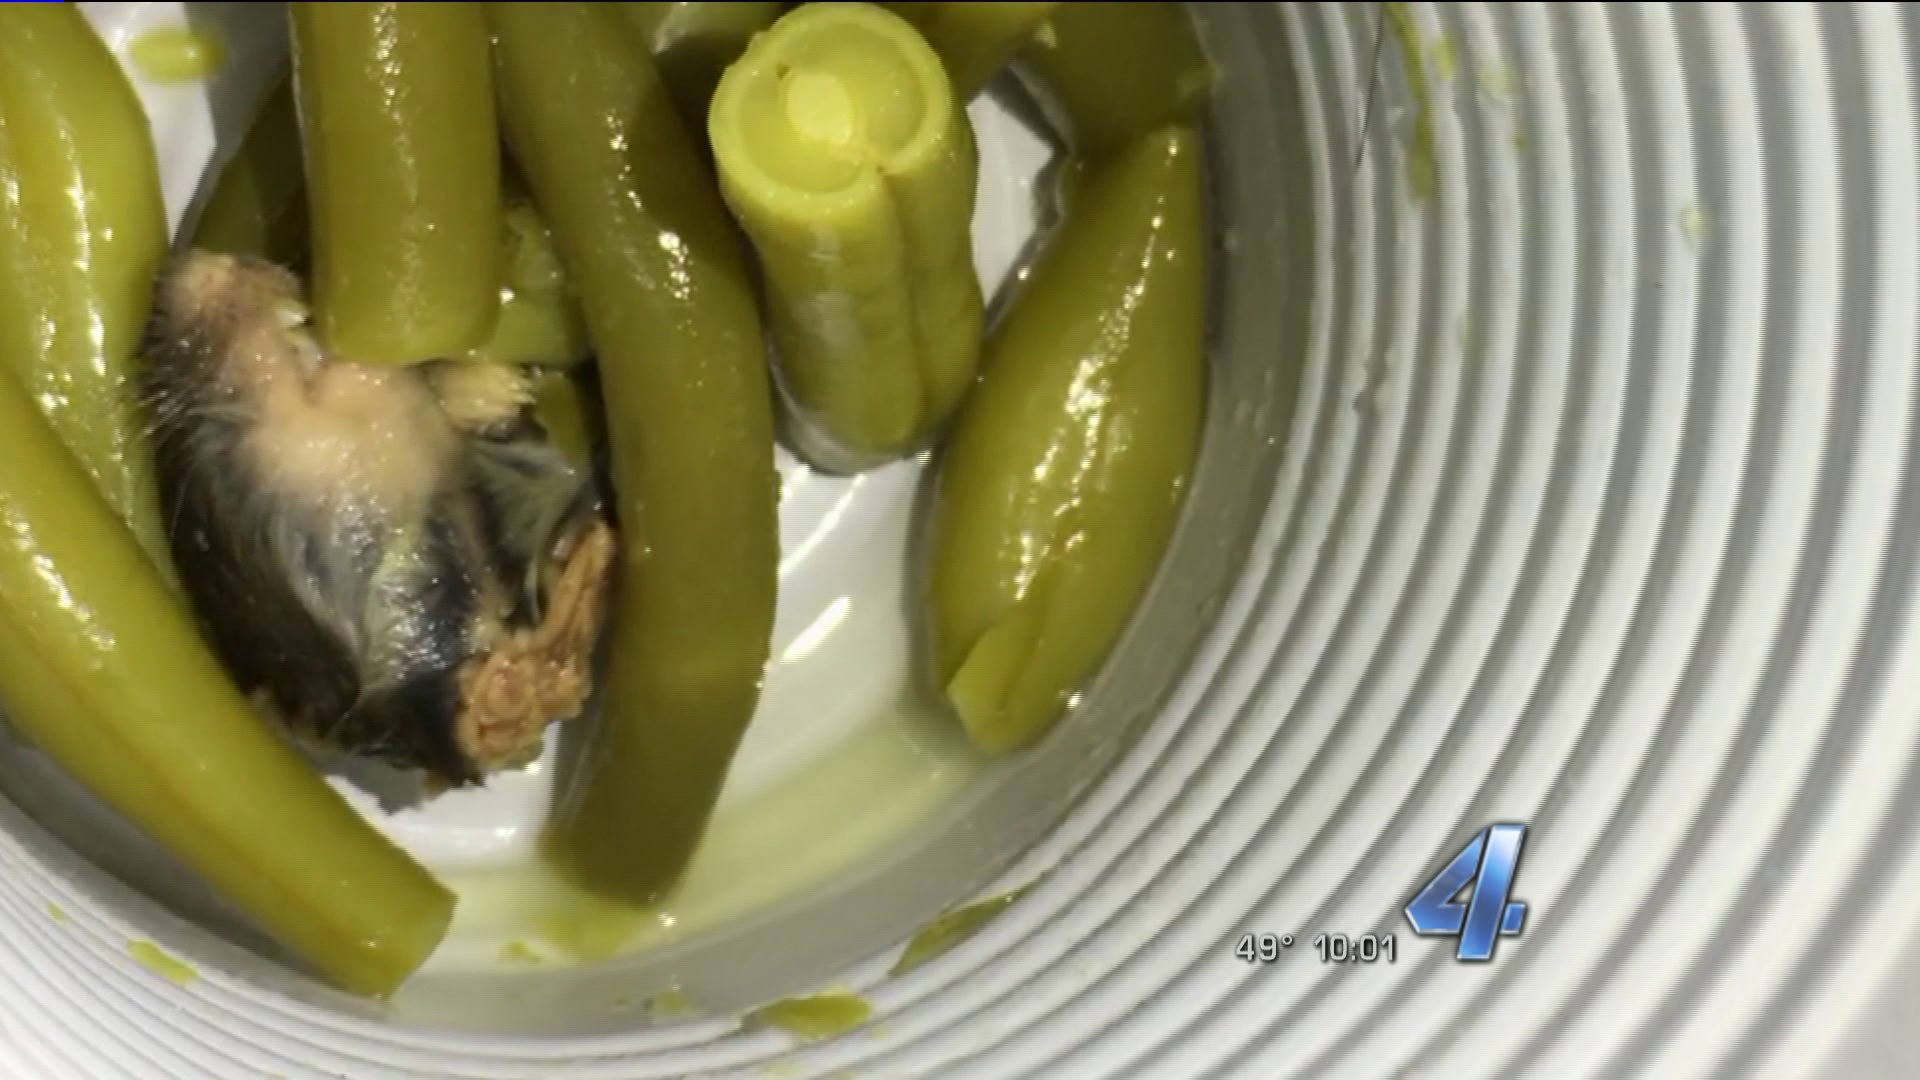 Oklahoma family found dead mouse in can of green beans